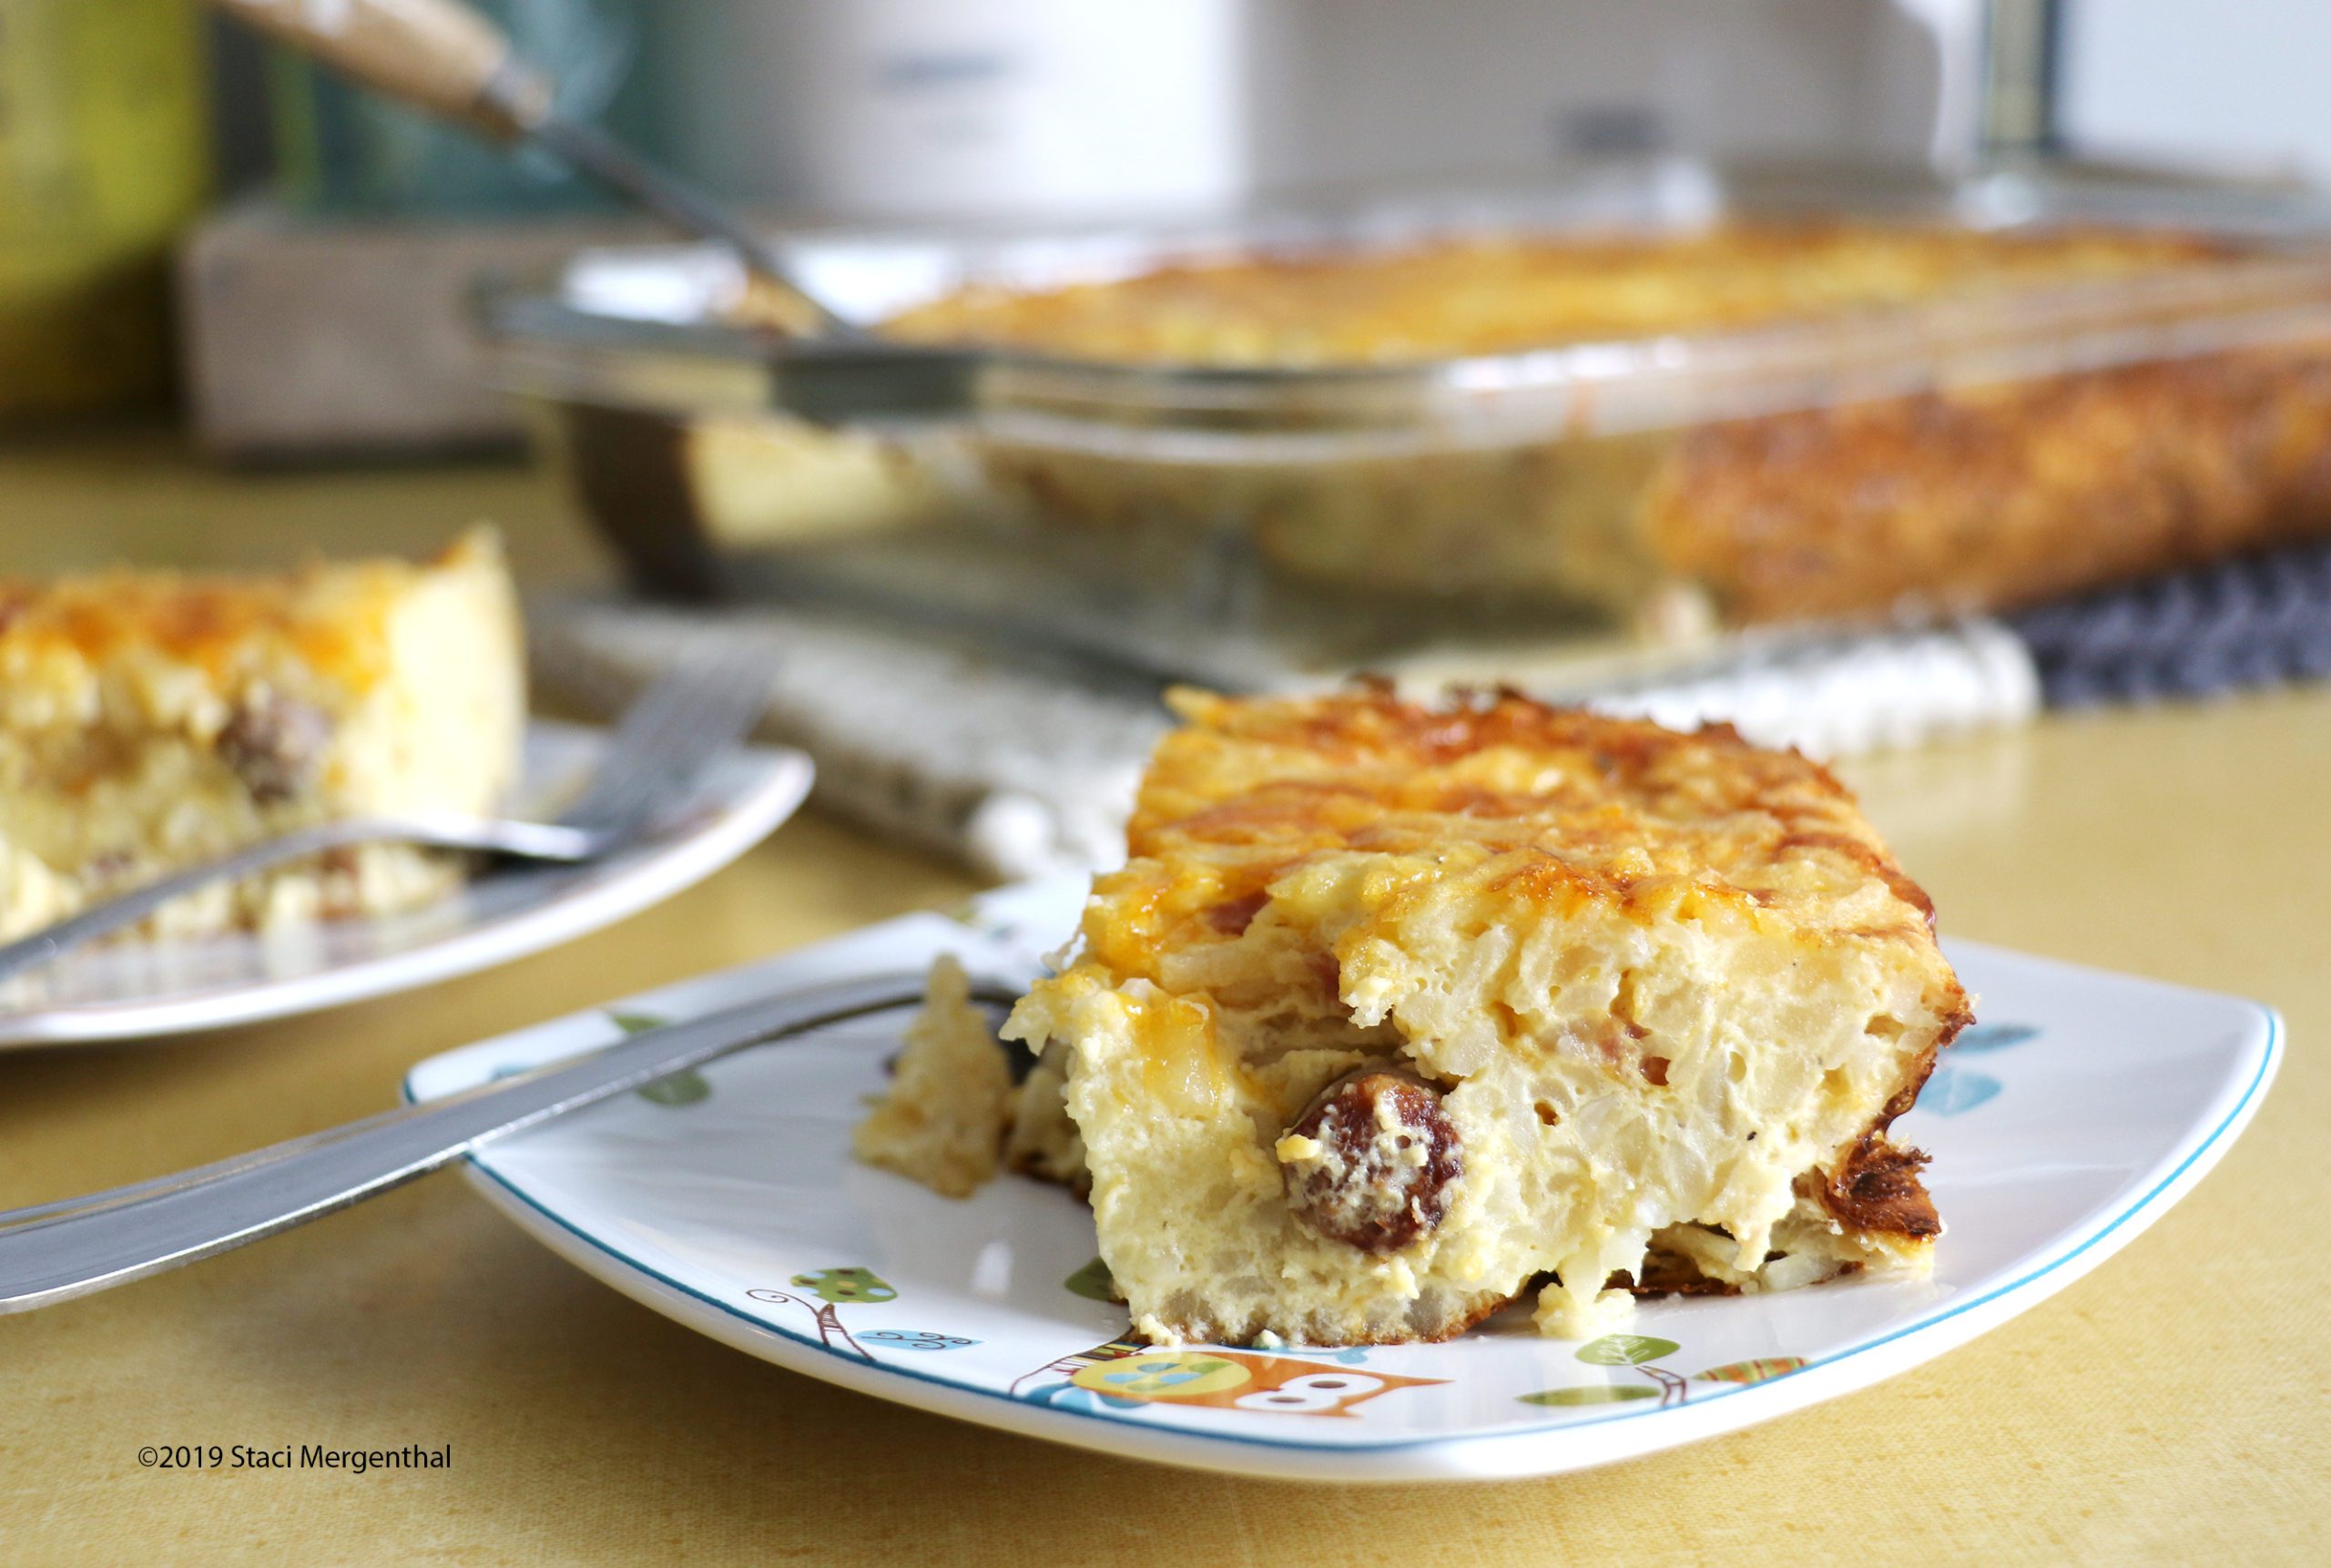 Sausage and Cheddar Hash Brown Breakfast Casserole for a Hungry Hockey Team